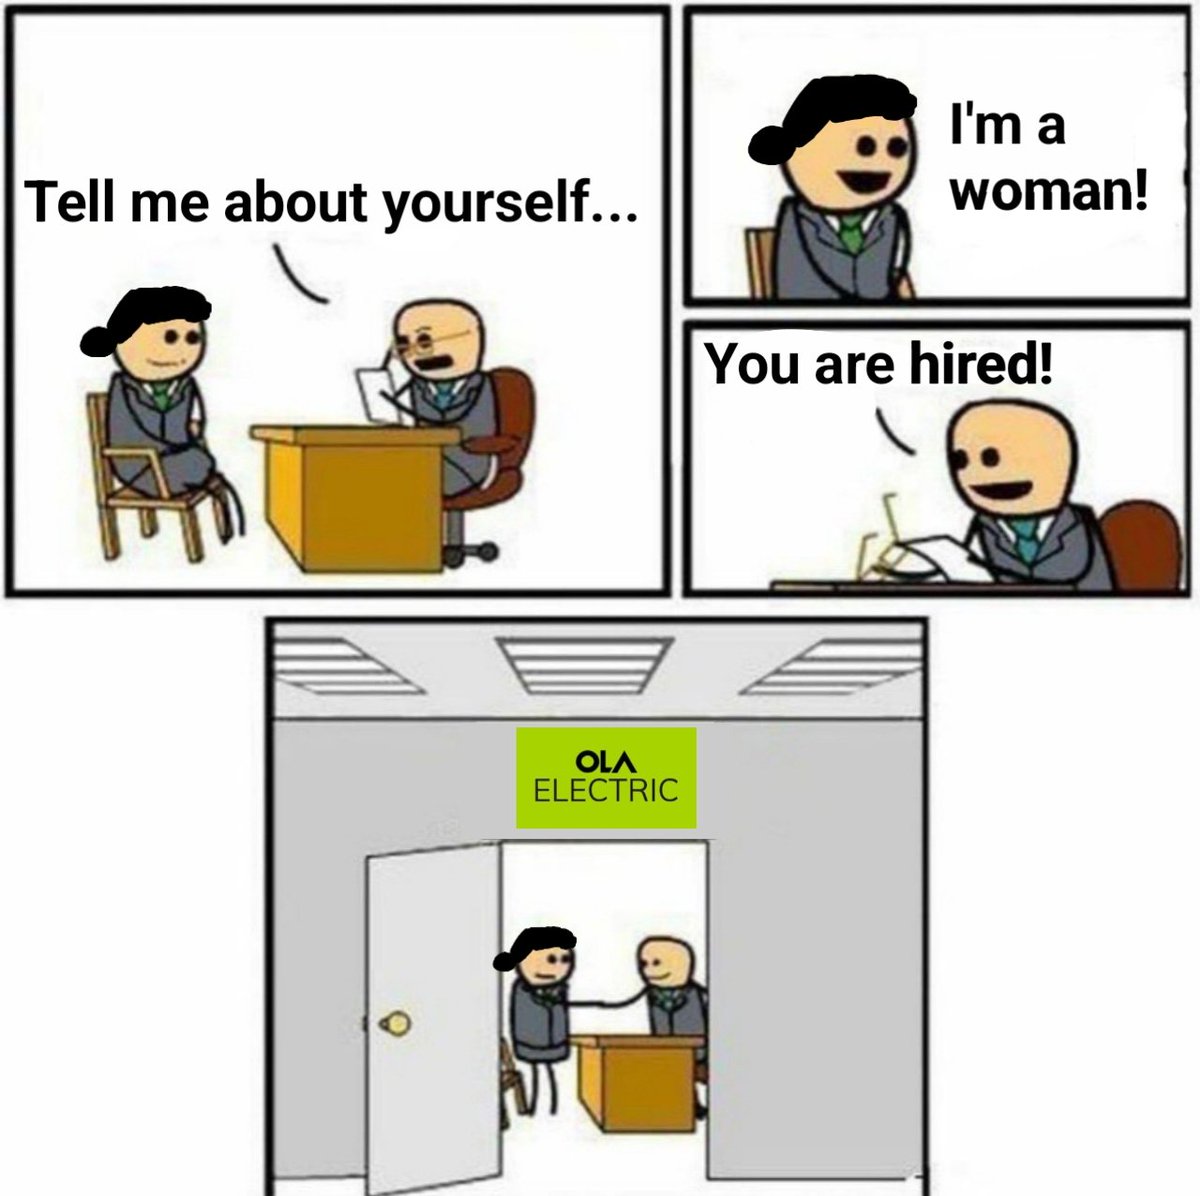 The hiring process of #OlaElectric!